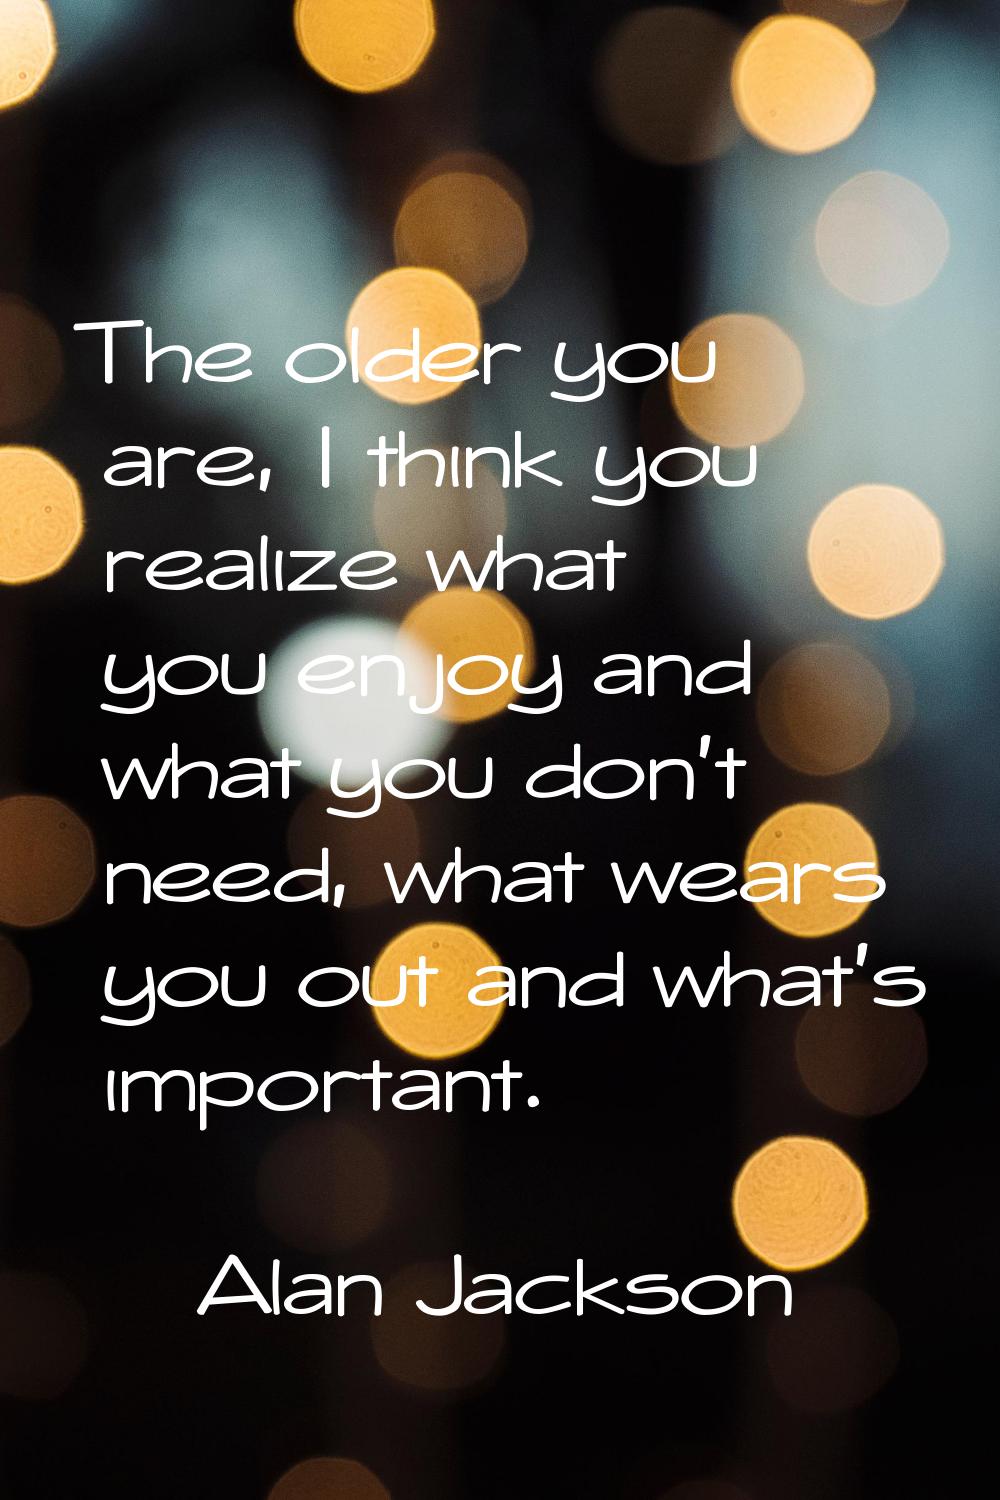 The older you are, I think you realize what you enjoy and what you don't need, what wears you out a